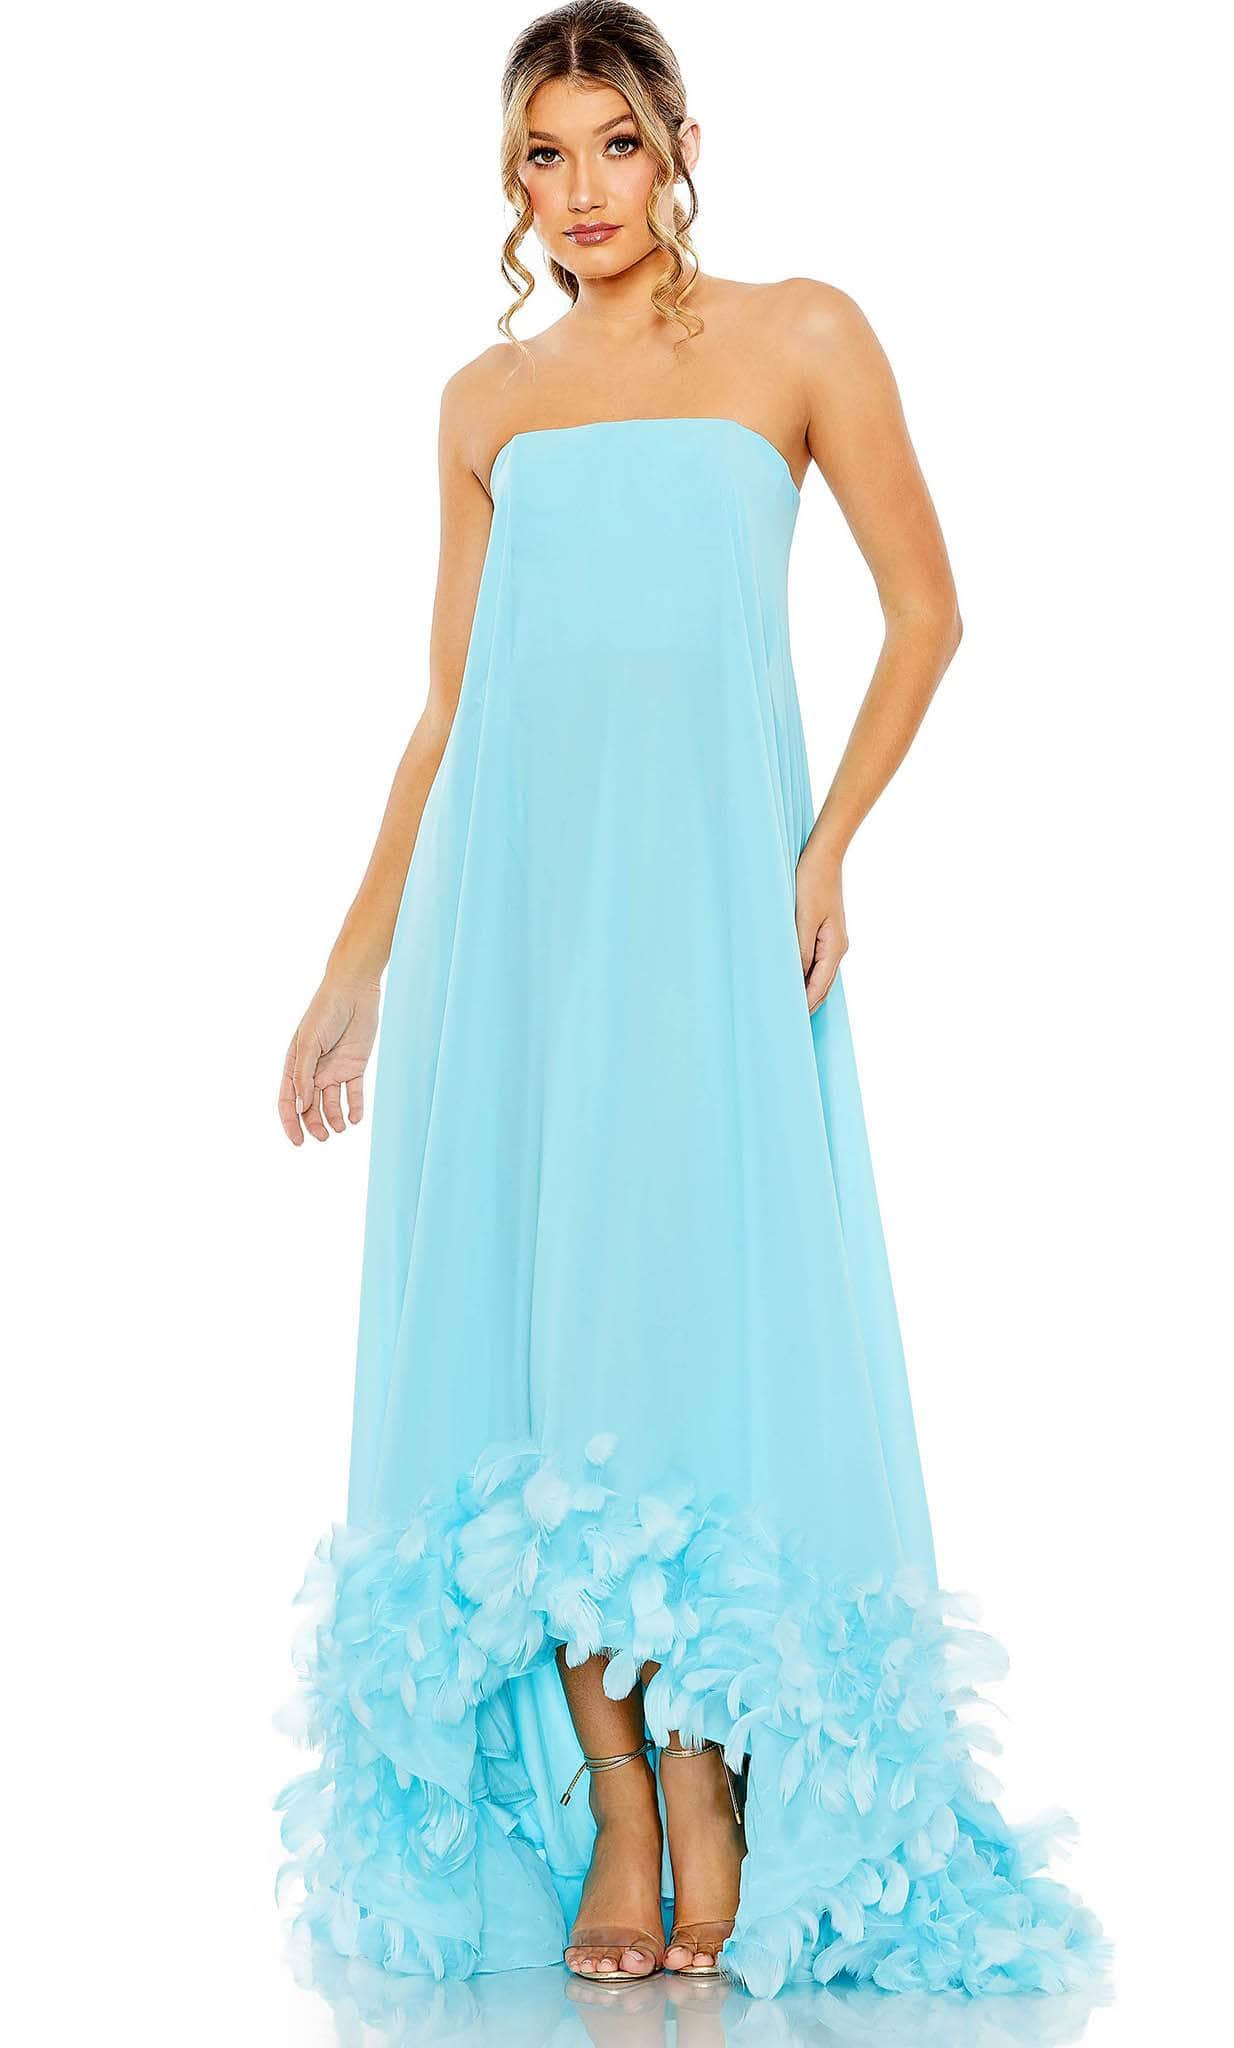 Image of Mac Duggal 13001 - Strapless Feathered High-low Hem Dress